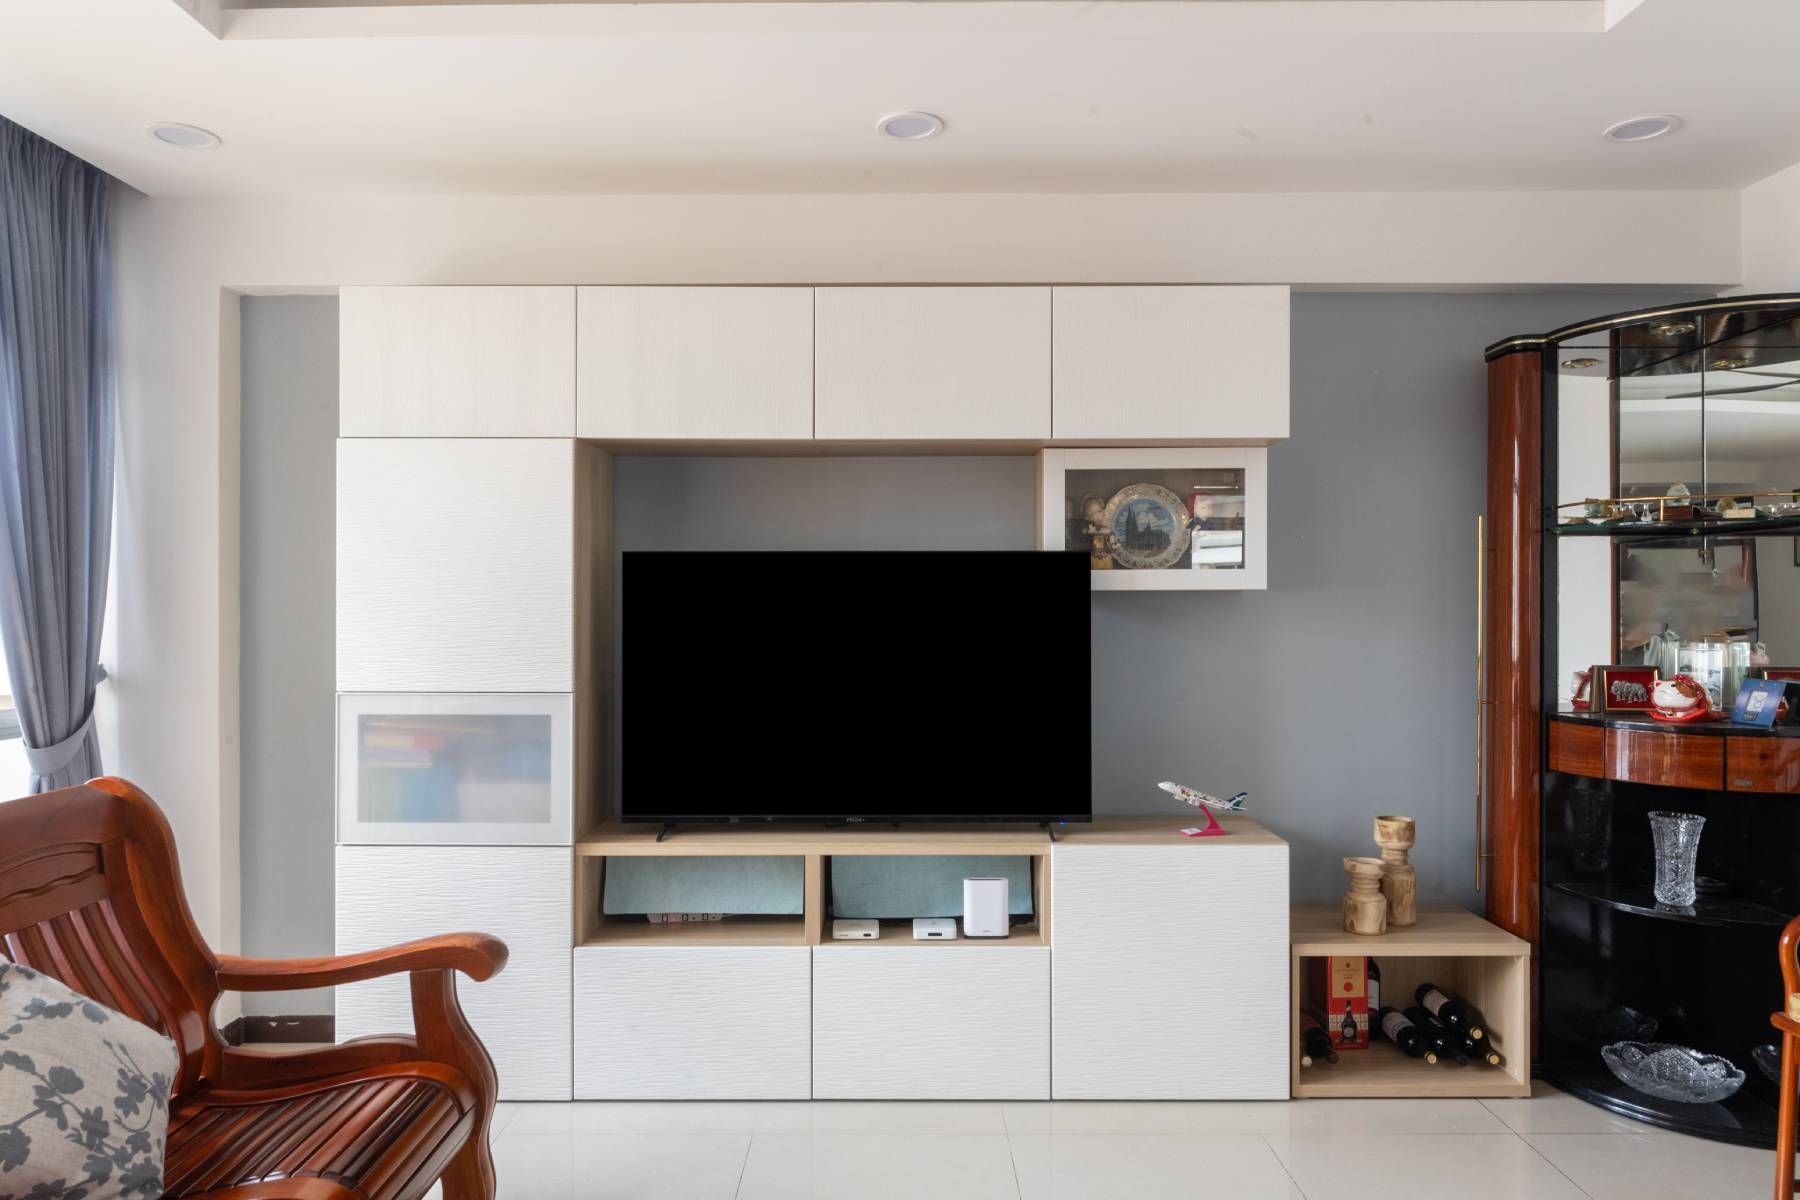 Minimalist Design With A White TV Unit And Grey Paint For The Back Wall